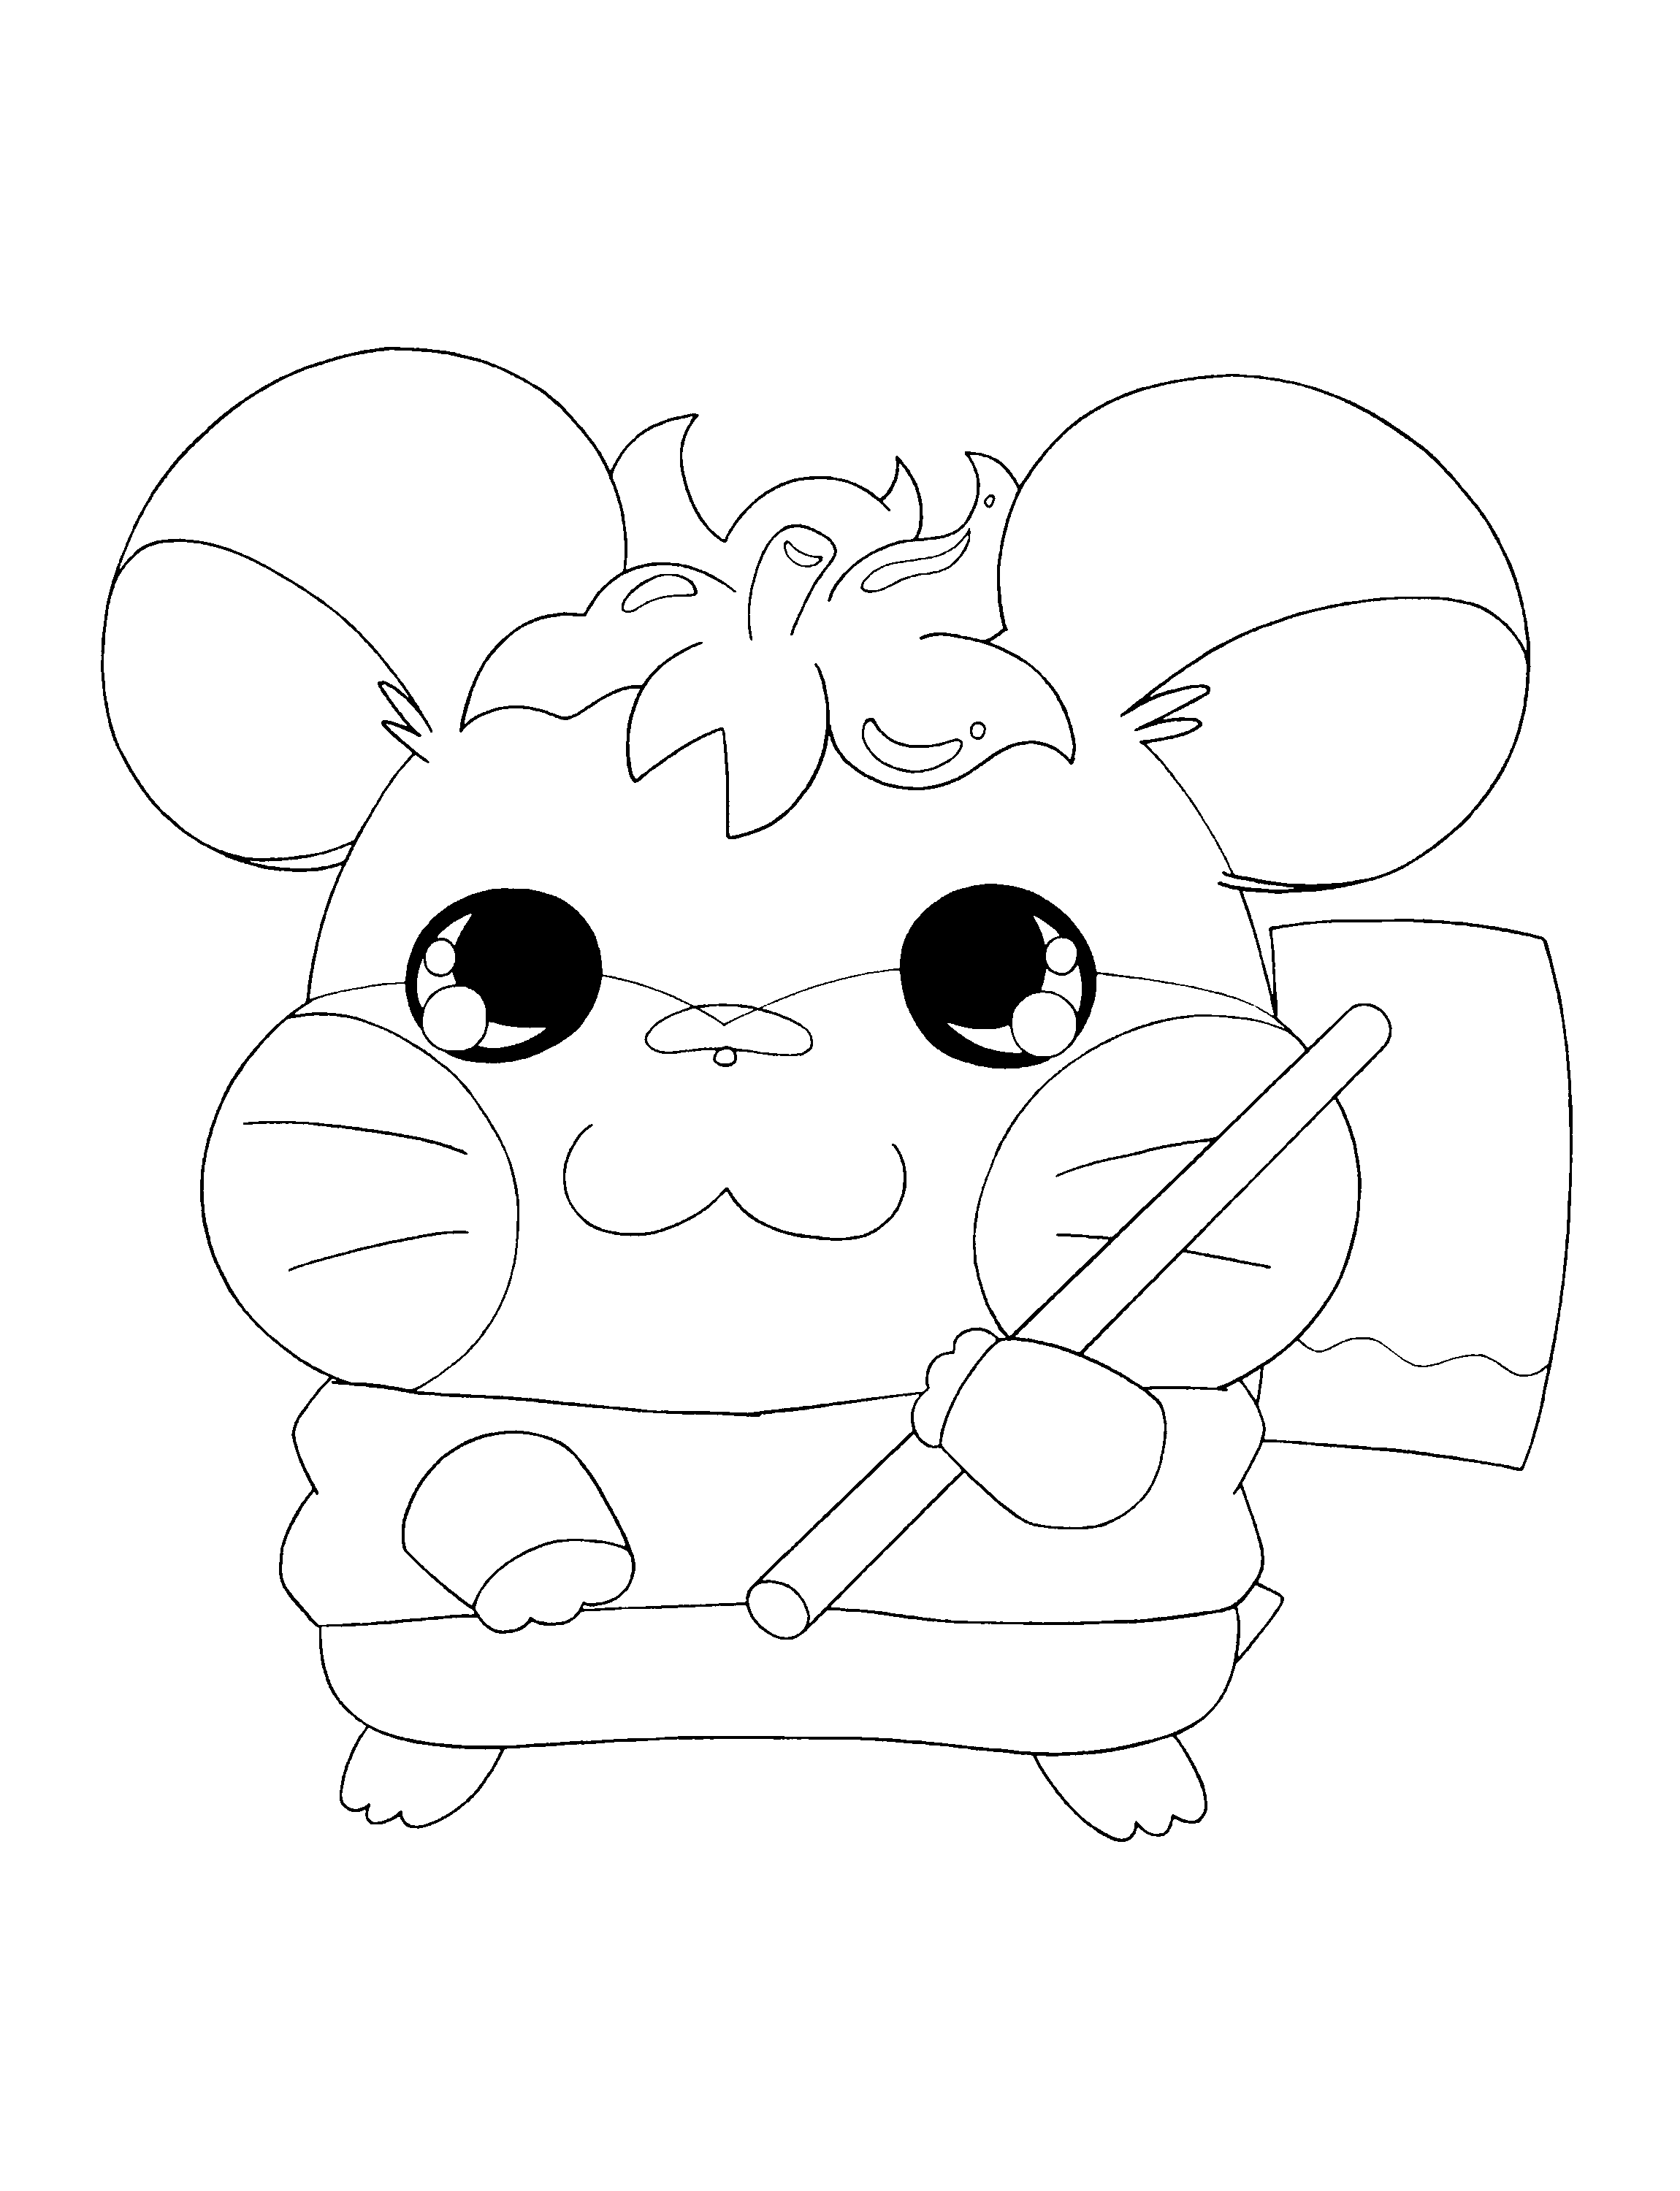 Coloring pages » Hamtaro Coloring pages